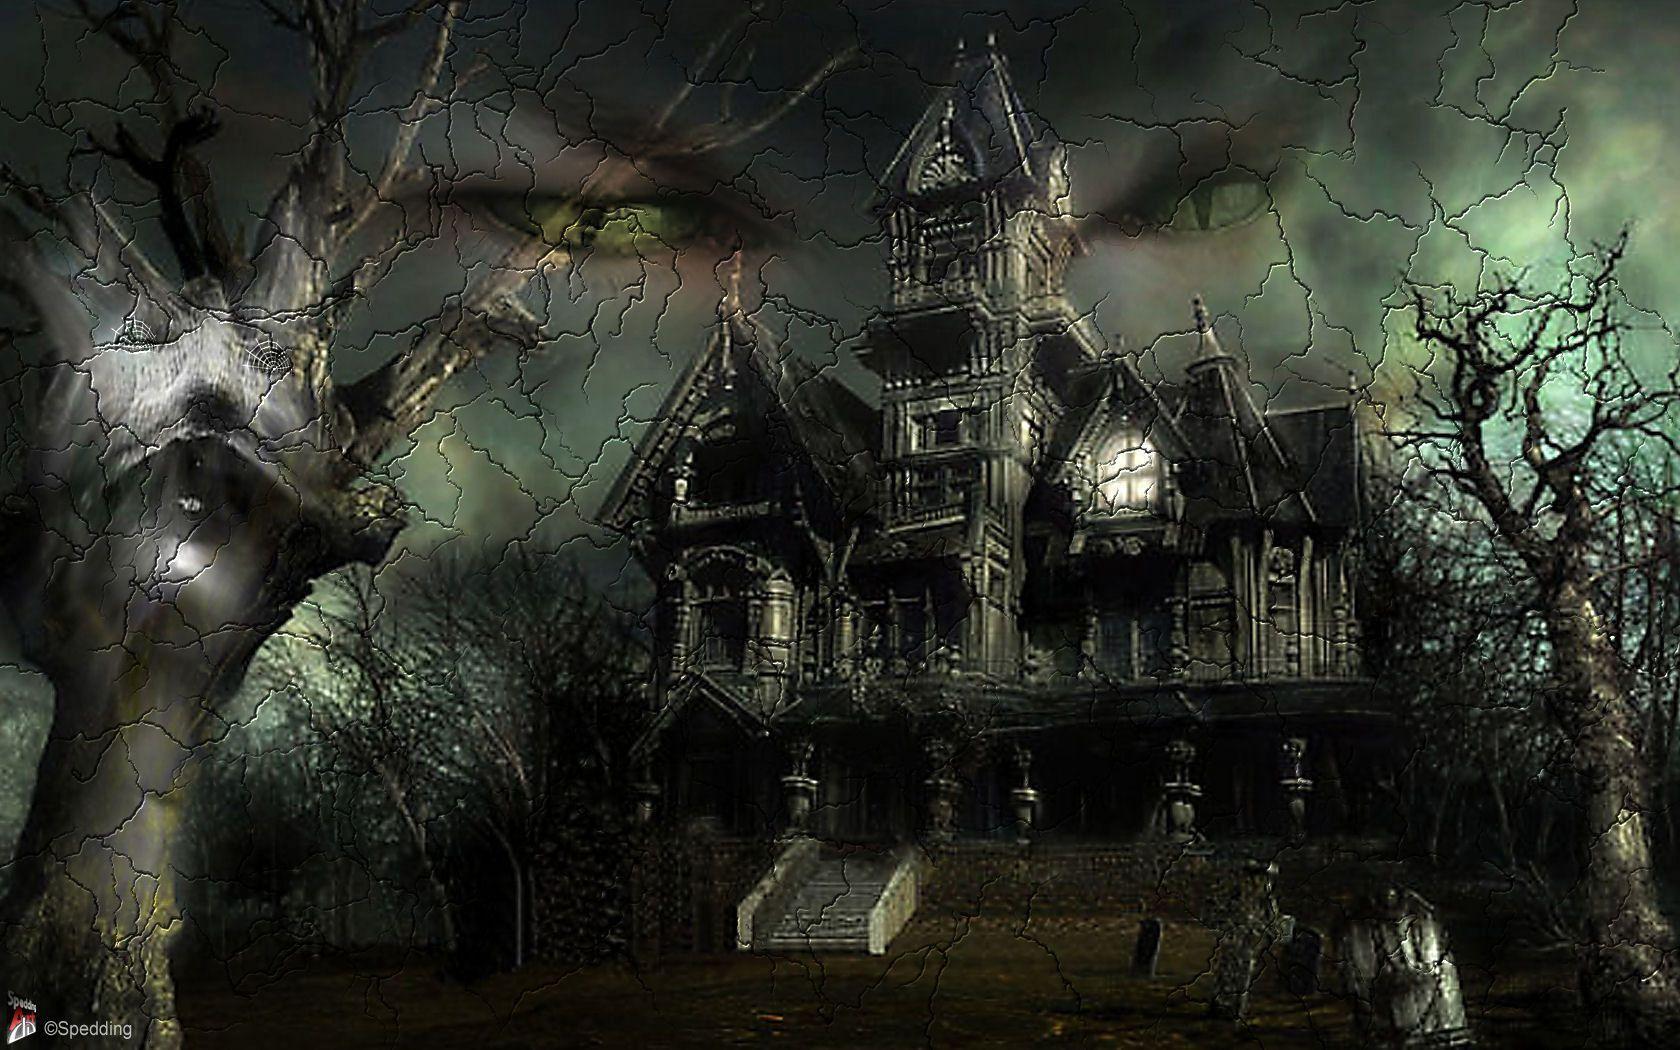 Halloween Picture download free